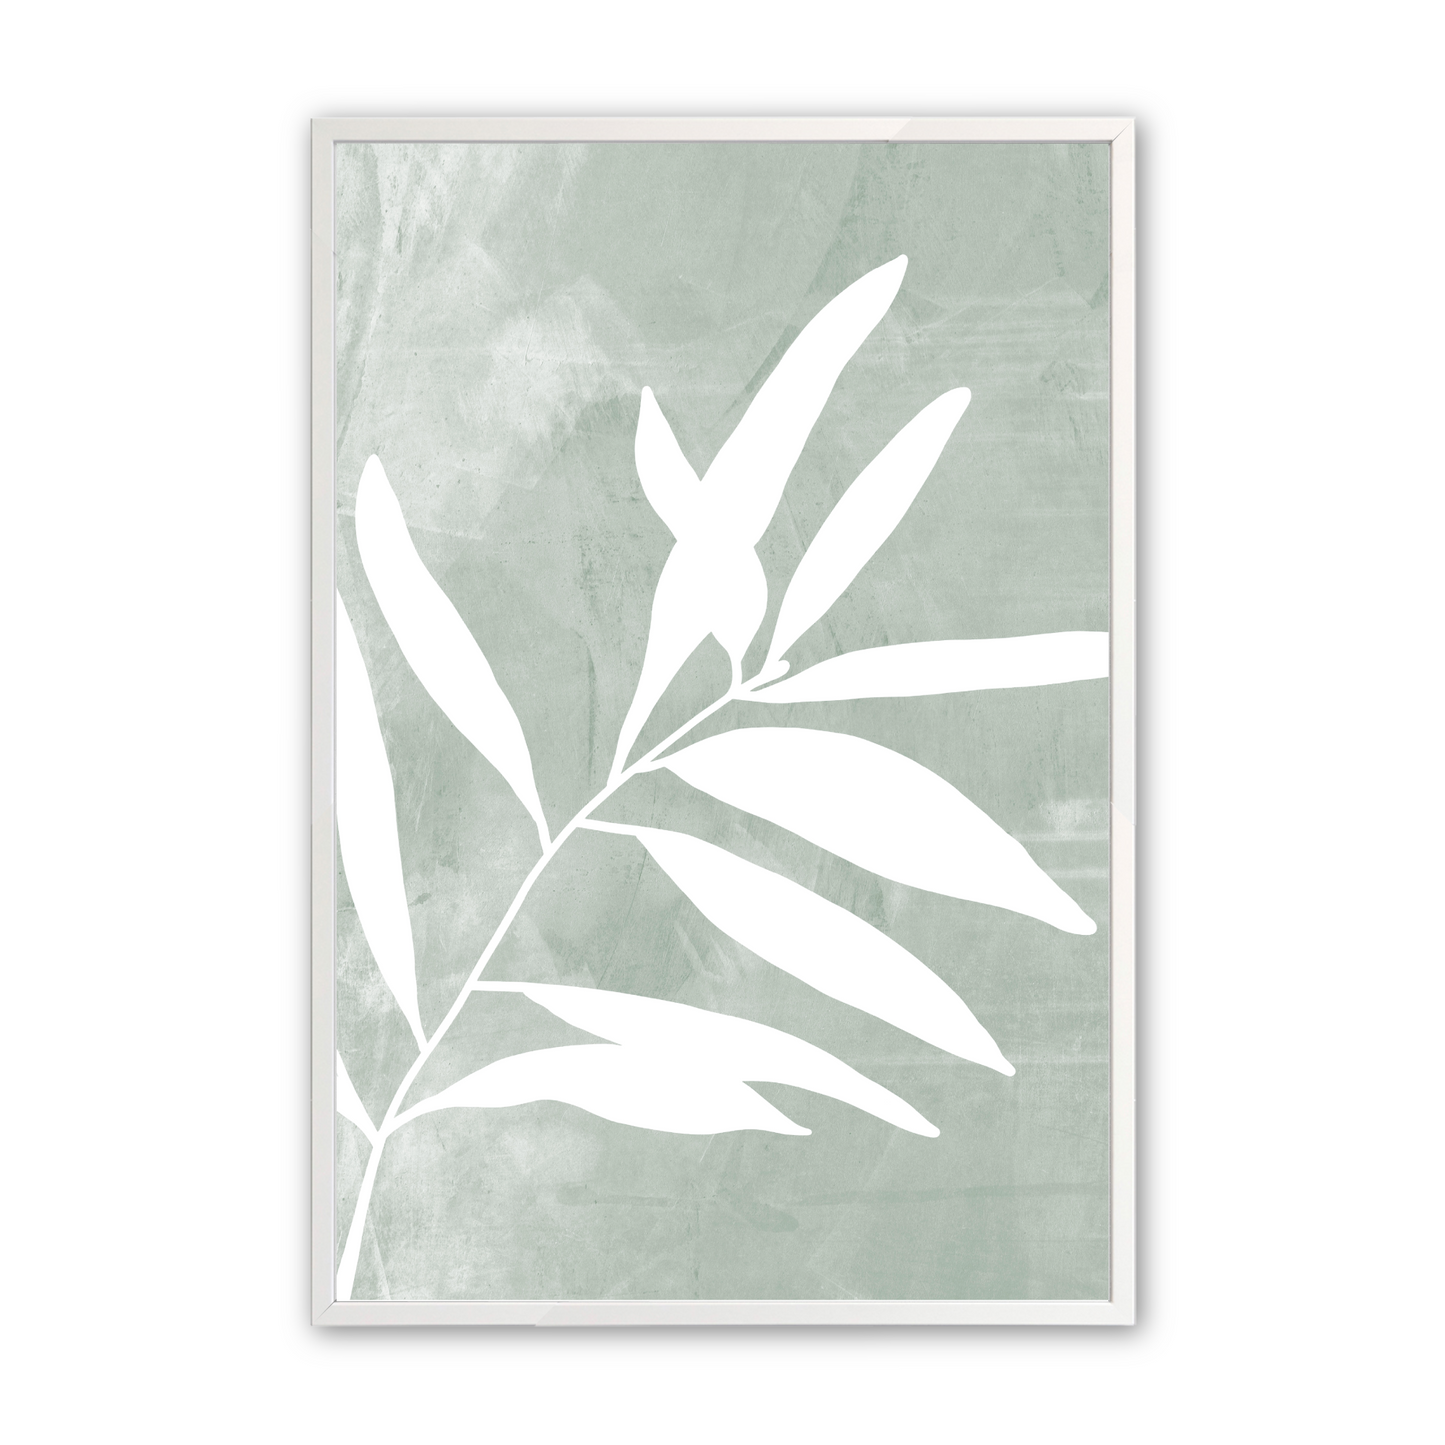 [color:Opaque White], Picture of the first of 3 leaf illustrations in white frame